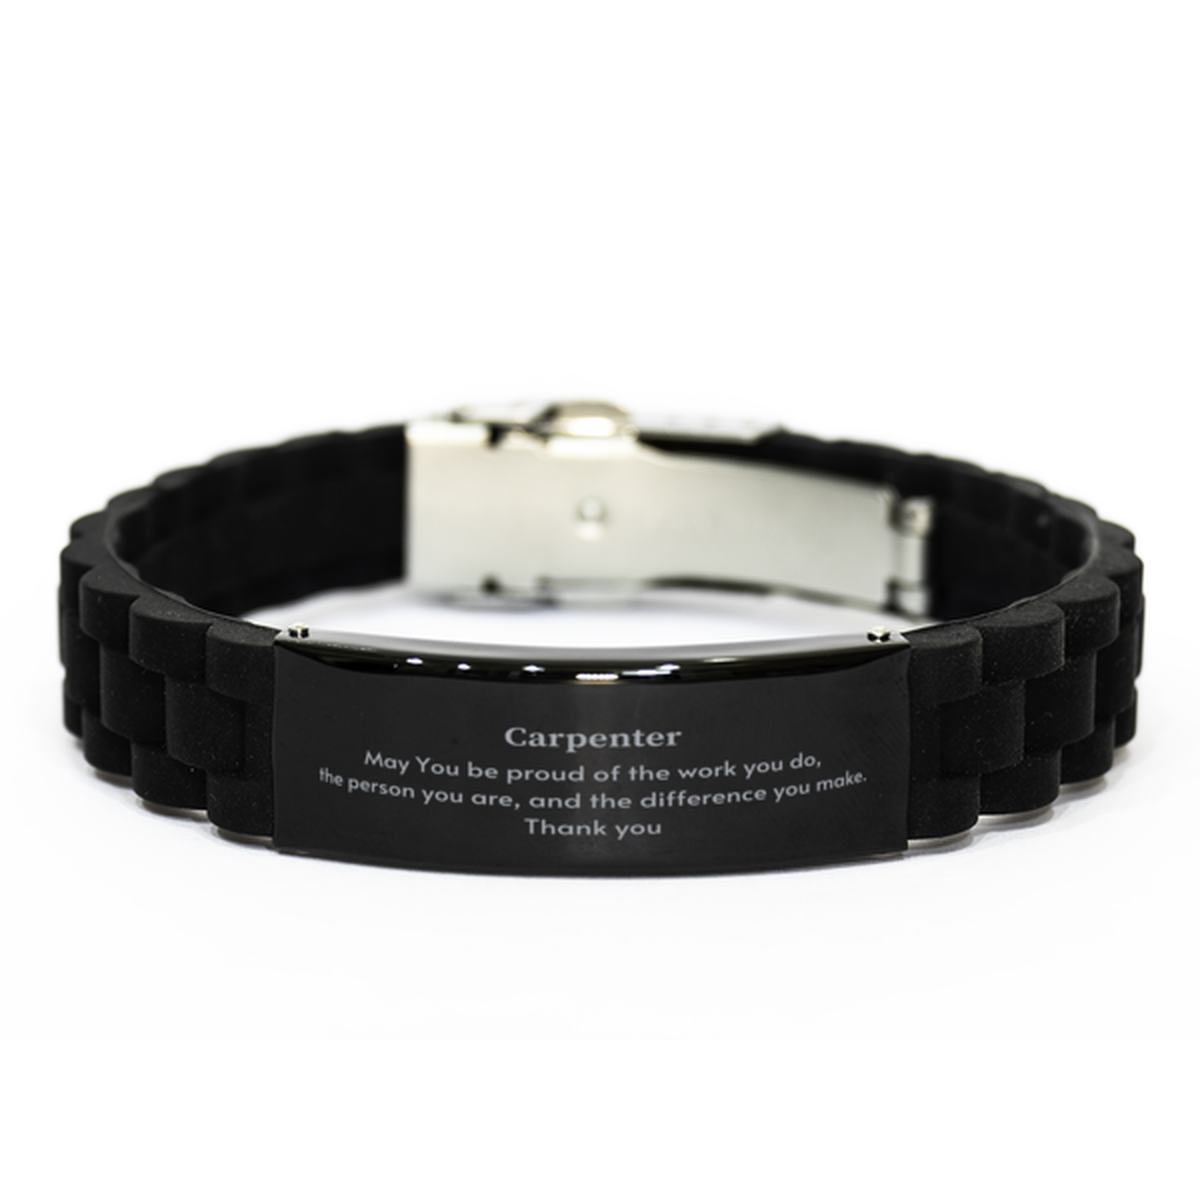 Heartwarming Black Glidelock Clasp Bracelet Retirement Coworkers Gifts for Carpenter, Carpenter May You be proud of the work you do, the person you are Gifts for Boss Men Women Friends